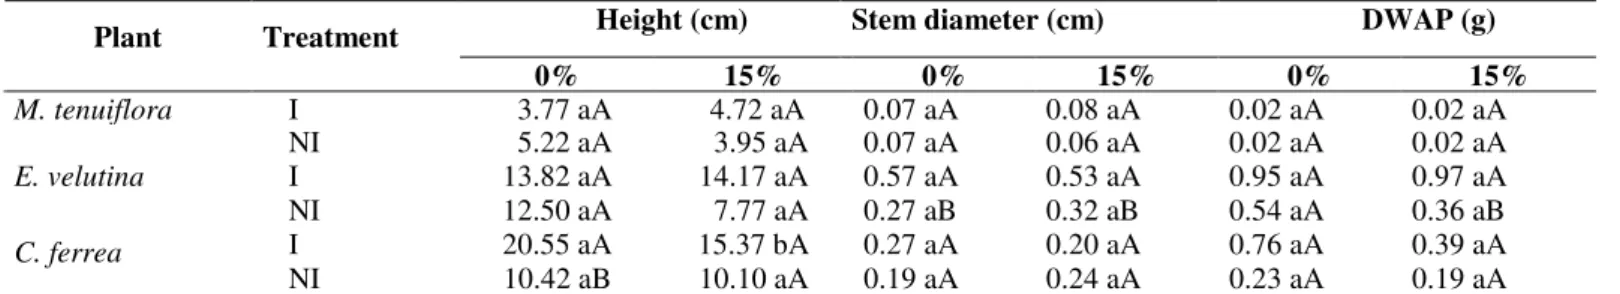 Table 3. Growth parameters of Mimosa tenuiflora, Erythrina velutina and Caesalpinia ferrea inoculated (I) or not inoculated (NI)  with  arbuscular  mycorrhizal  fungi,  cultivated  in  non-contaminated  (0%)  and  in  15%  contaminated  soil,  after  90  d